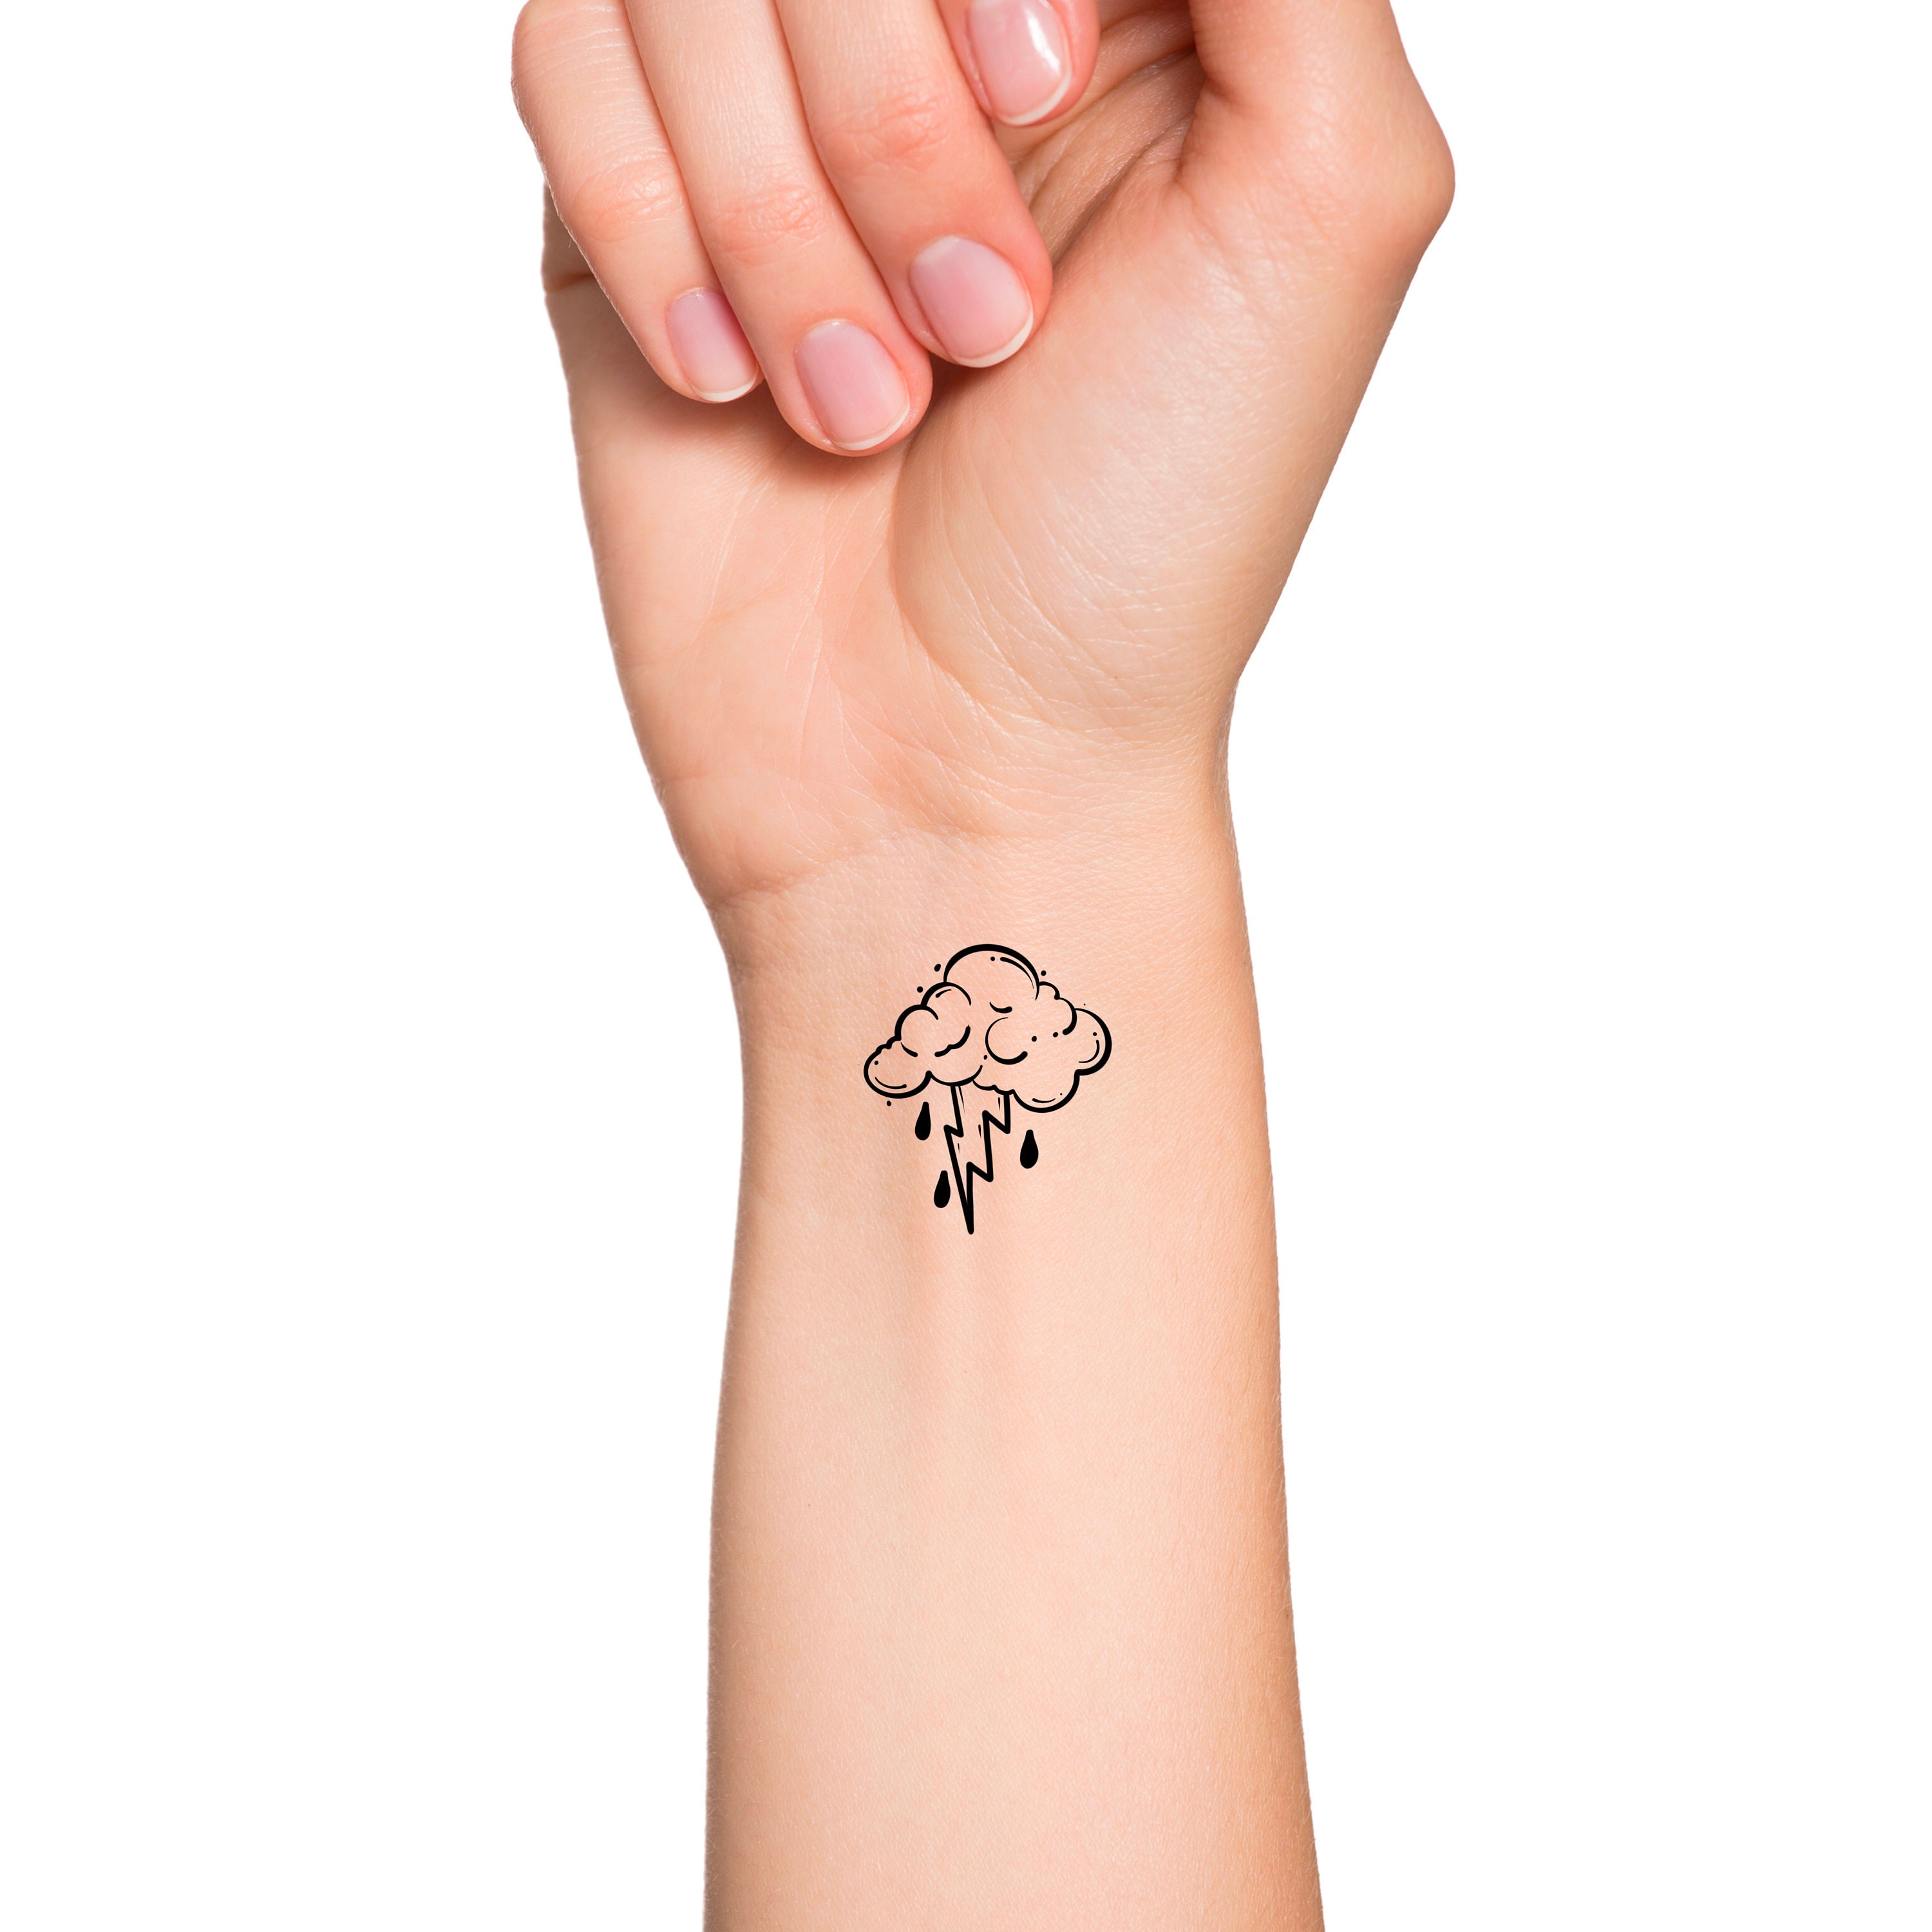 60 Best Cloud Tattoos from Dark and Thundering to Bright and Hopeful   Meanings Ideas and Designs  Cloud tattoo Cloud tattoo design Sky tattoos